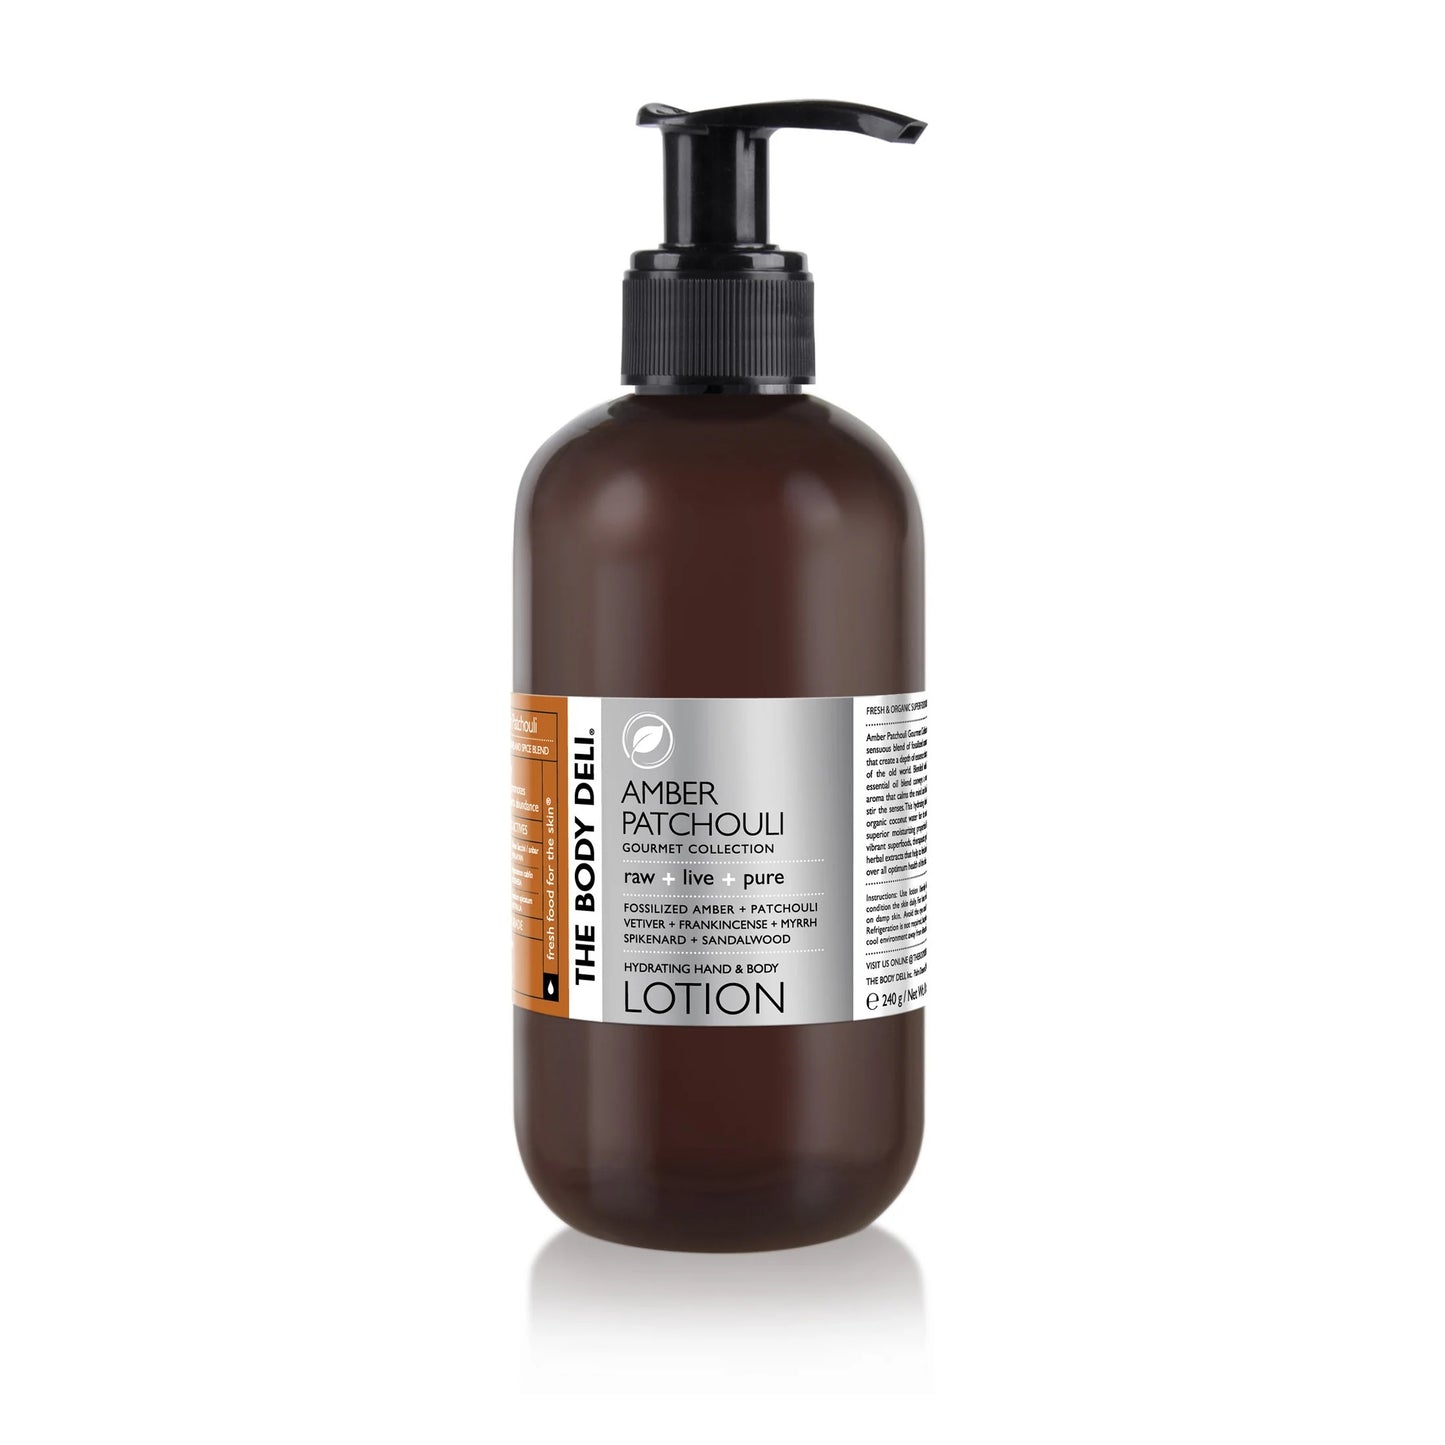 THE BODY DELI AMBER PATCHOULI Hand & Body Lotion